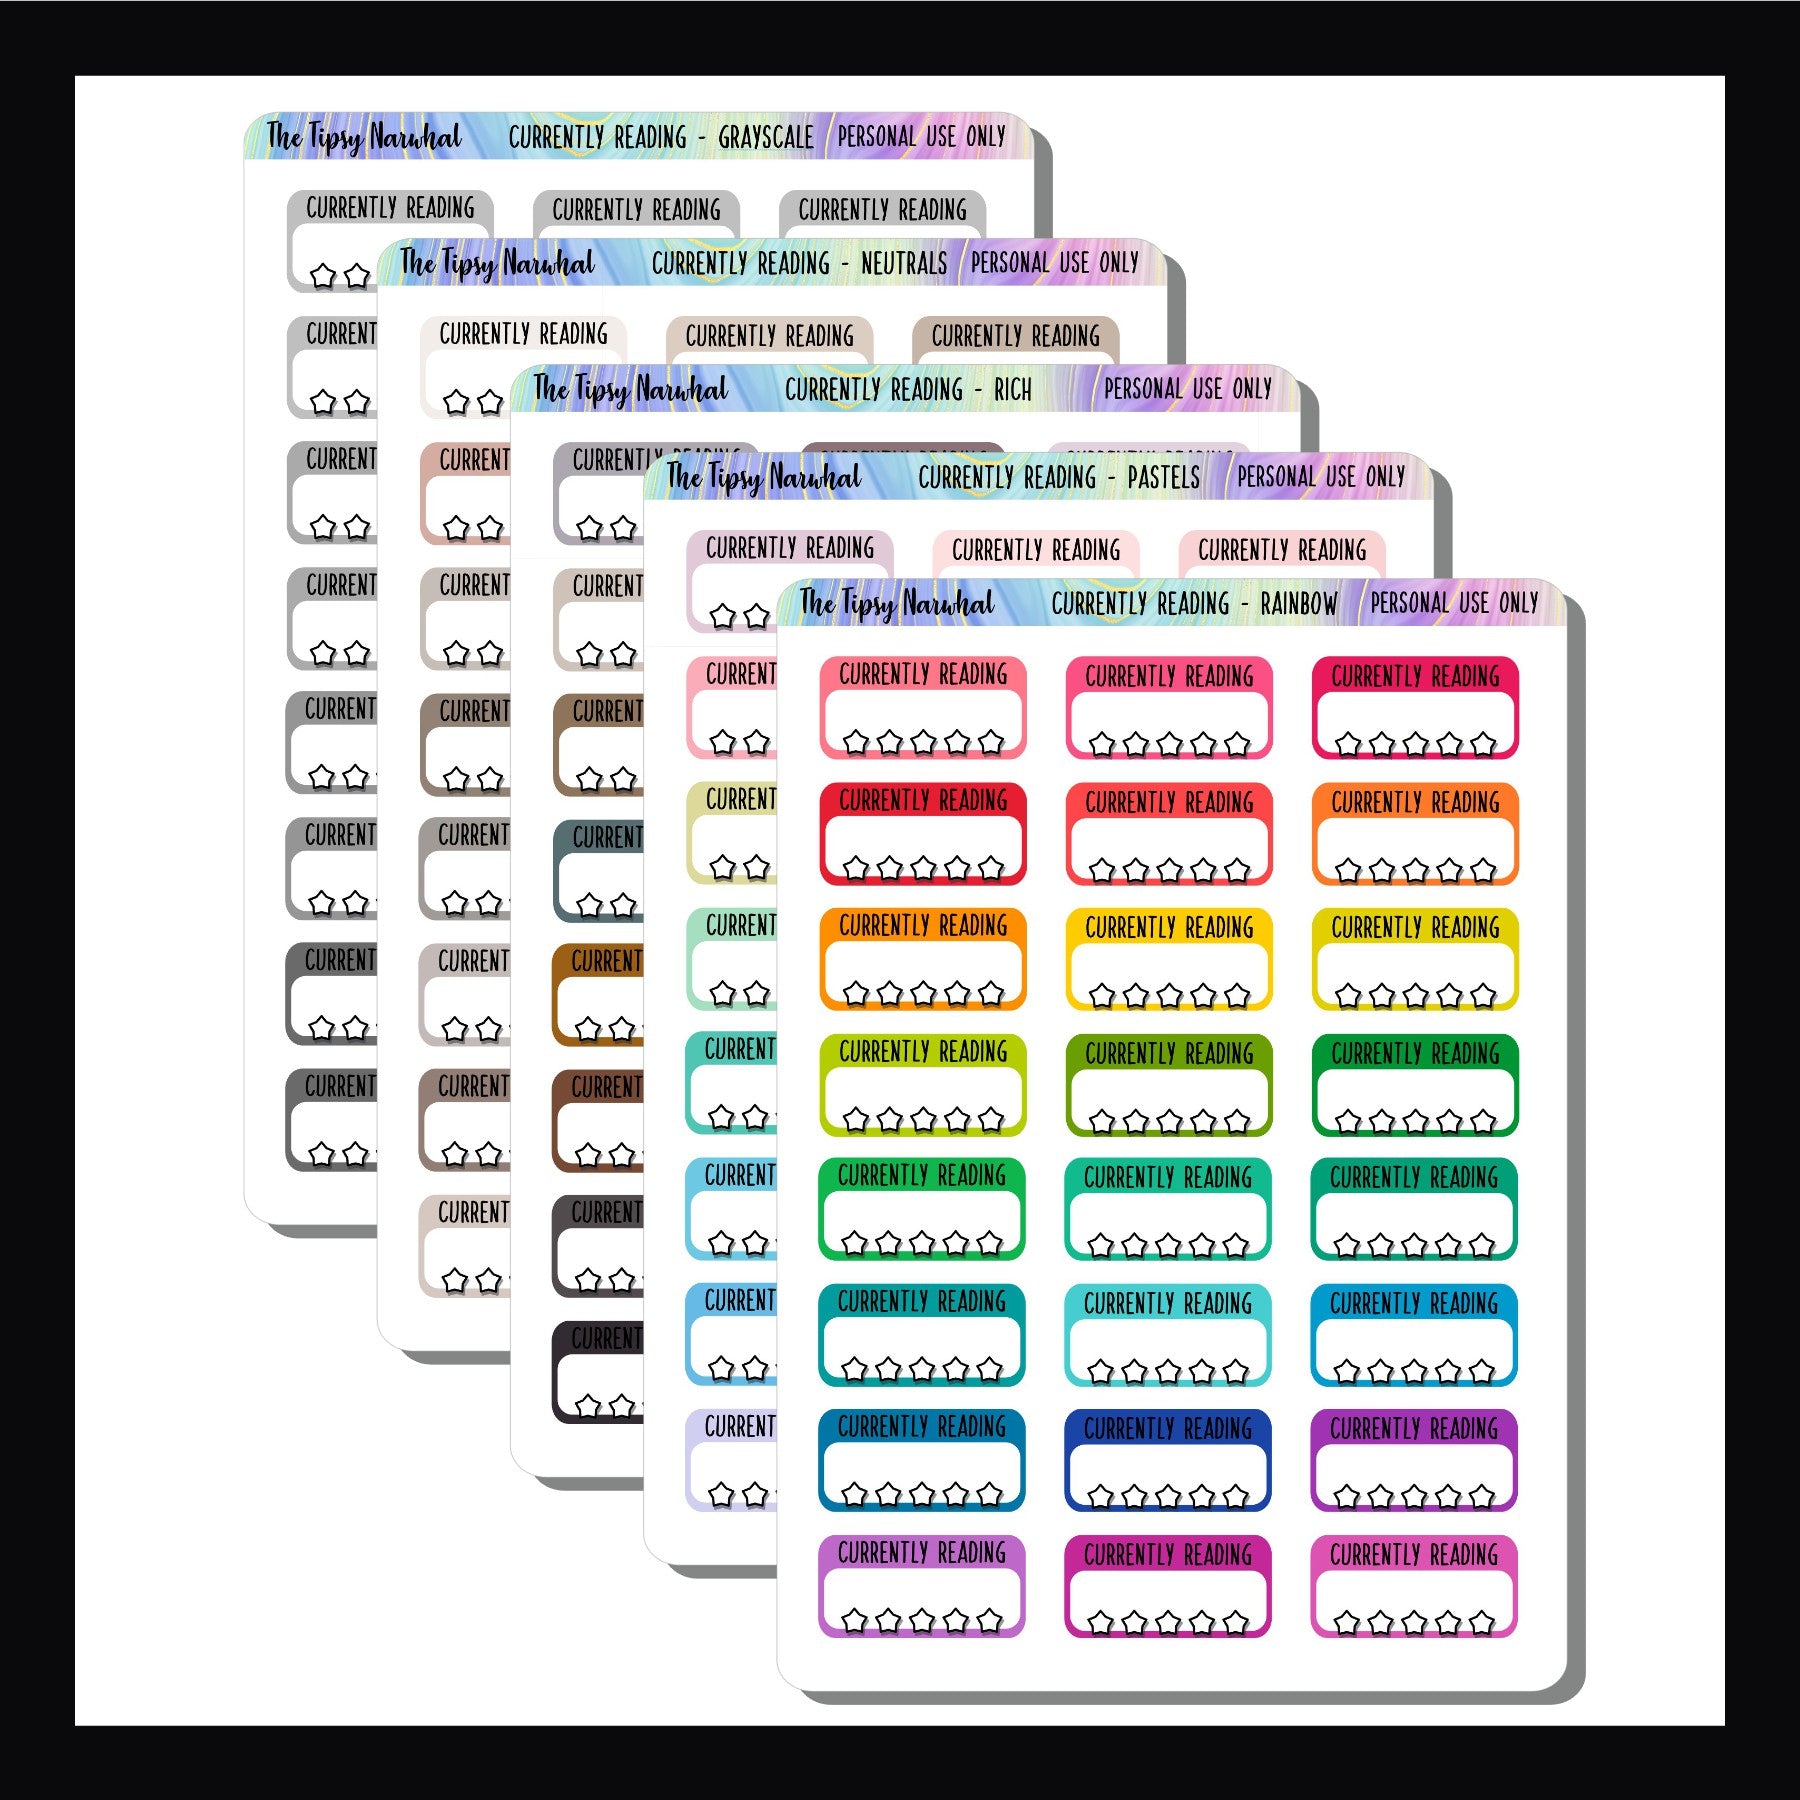 Currently Reading Sticker Sheets, functional stickers, book rating, book tracking, rainbow, pastel, rich, neutral and grayscale color palettes